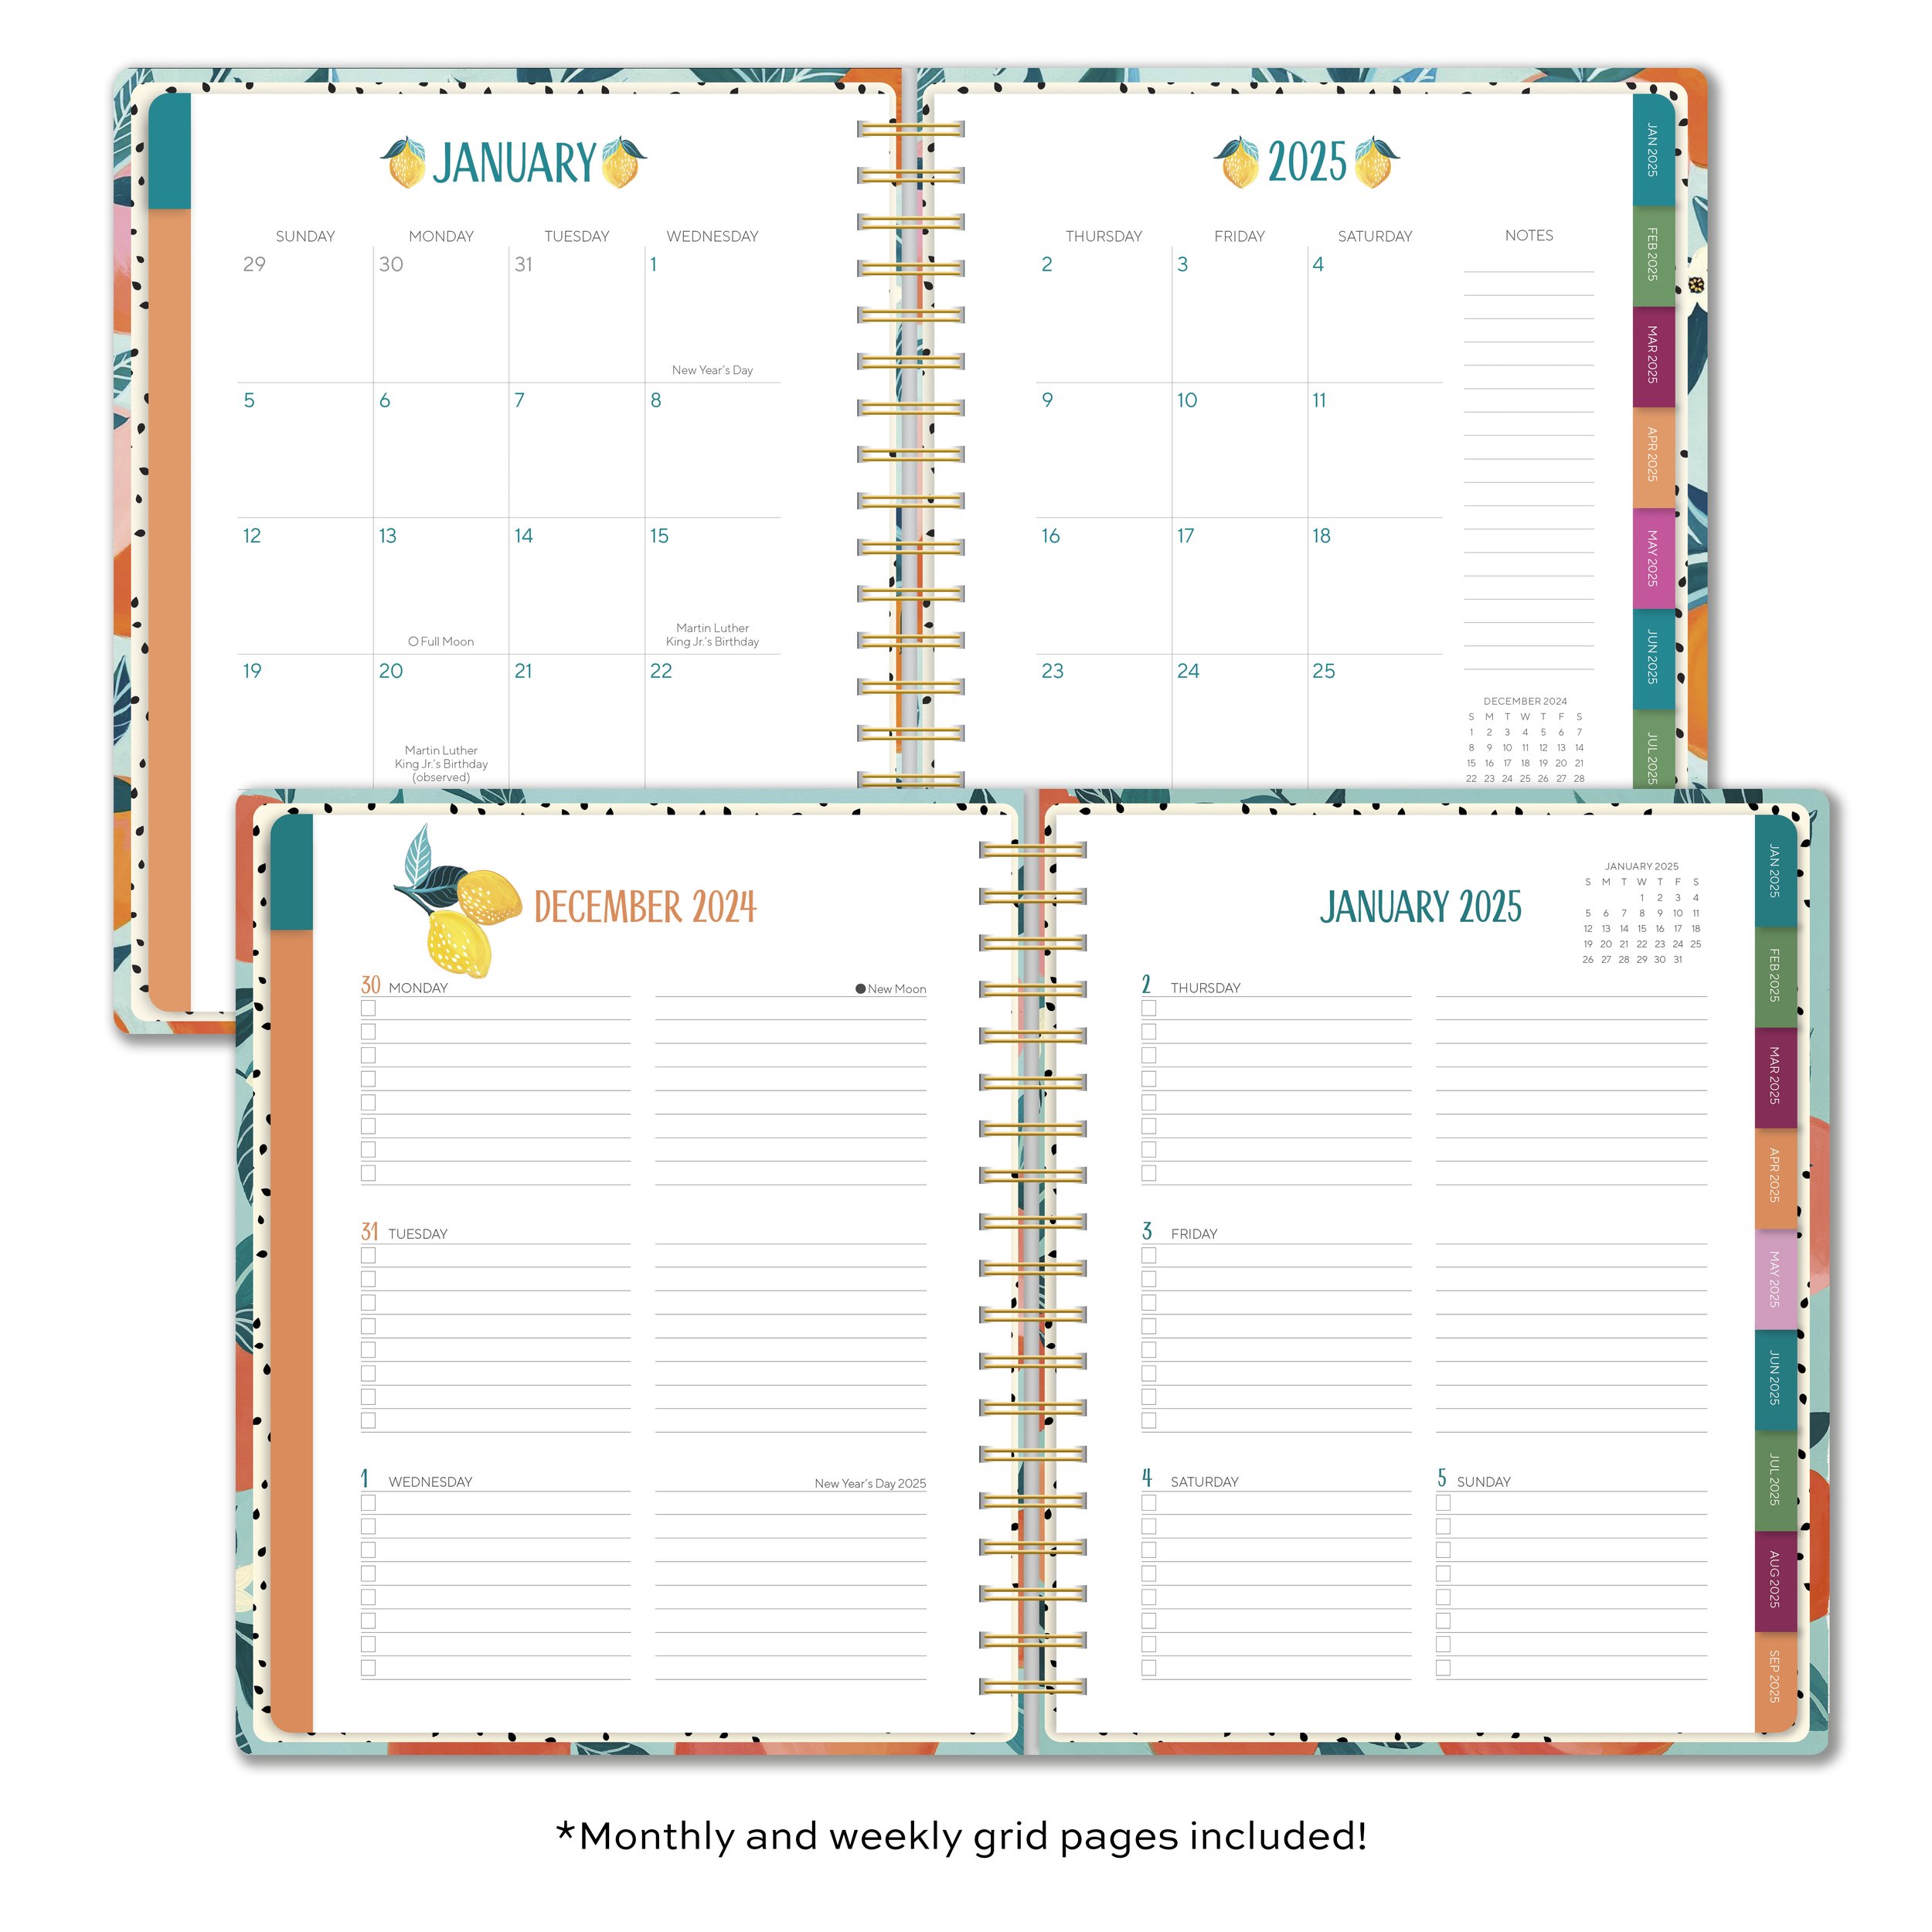 CHL-4206 Fruits_2025 Deluxe Planner Interior Pages.jpg